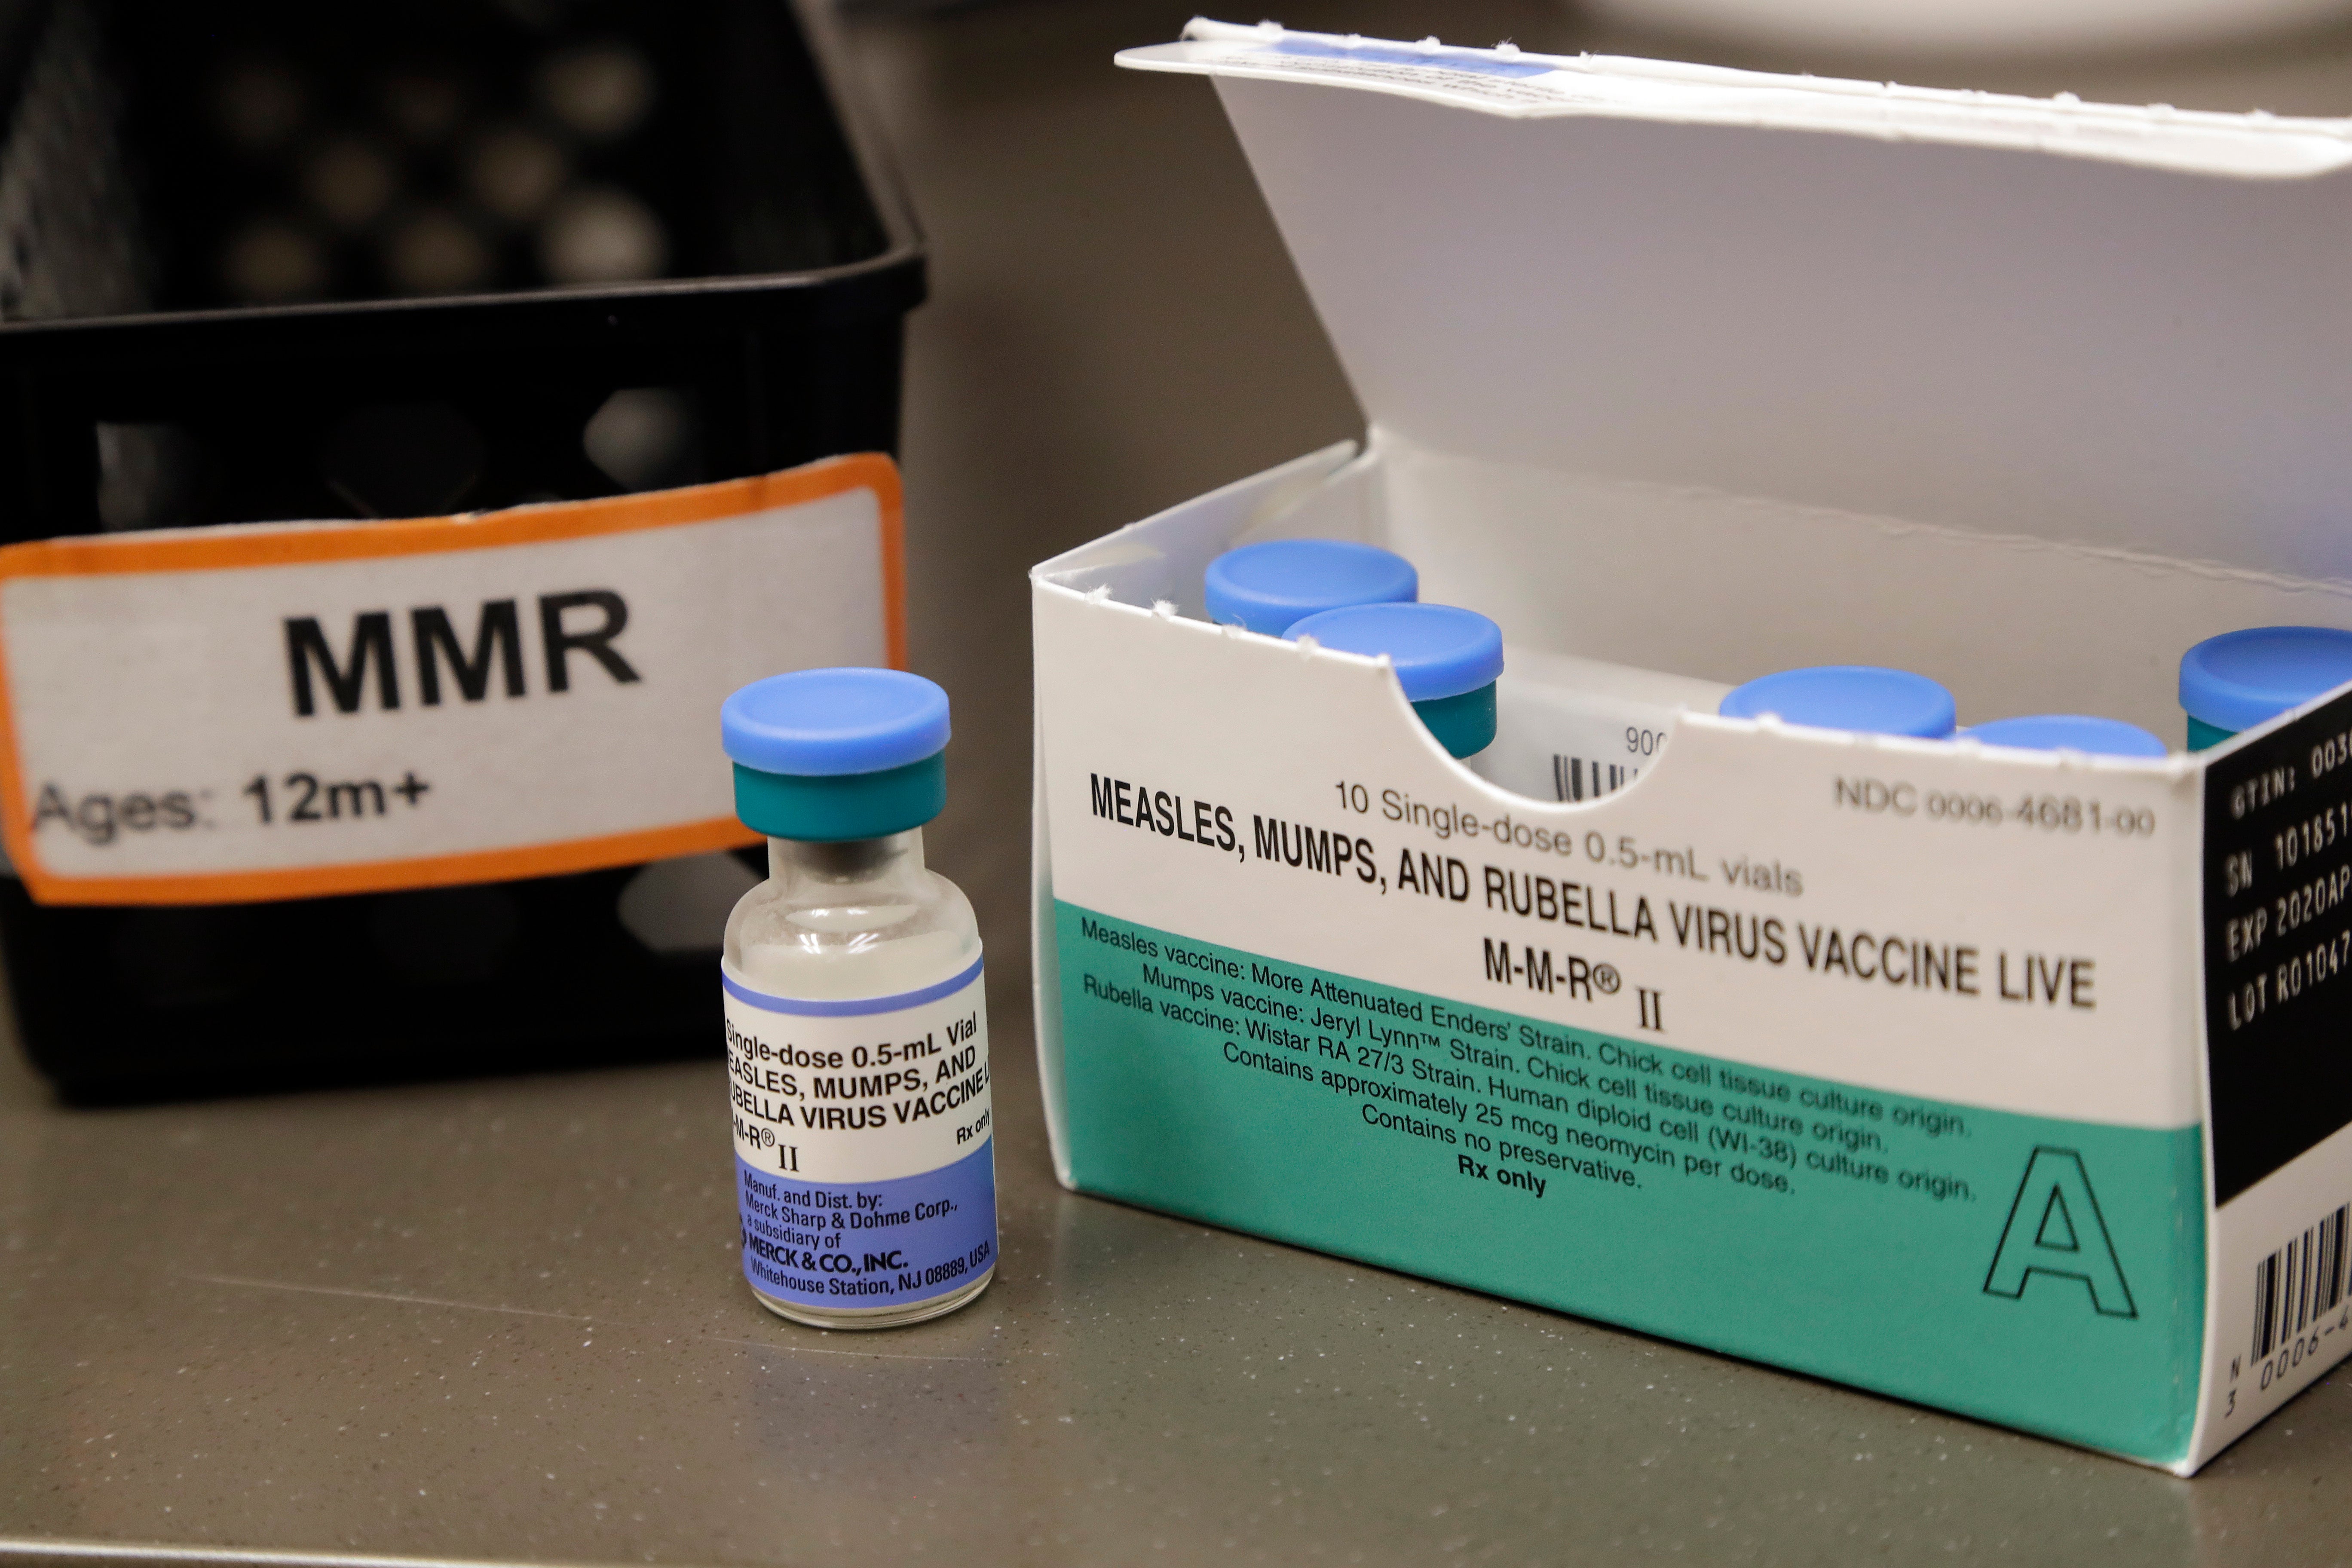 The MMR vaccine signficiantly reduces the likelihood of contracting the trio of diseases